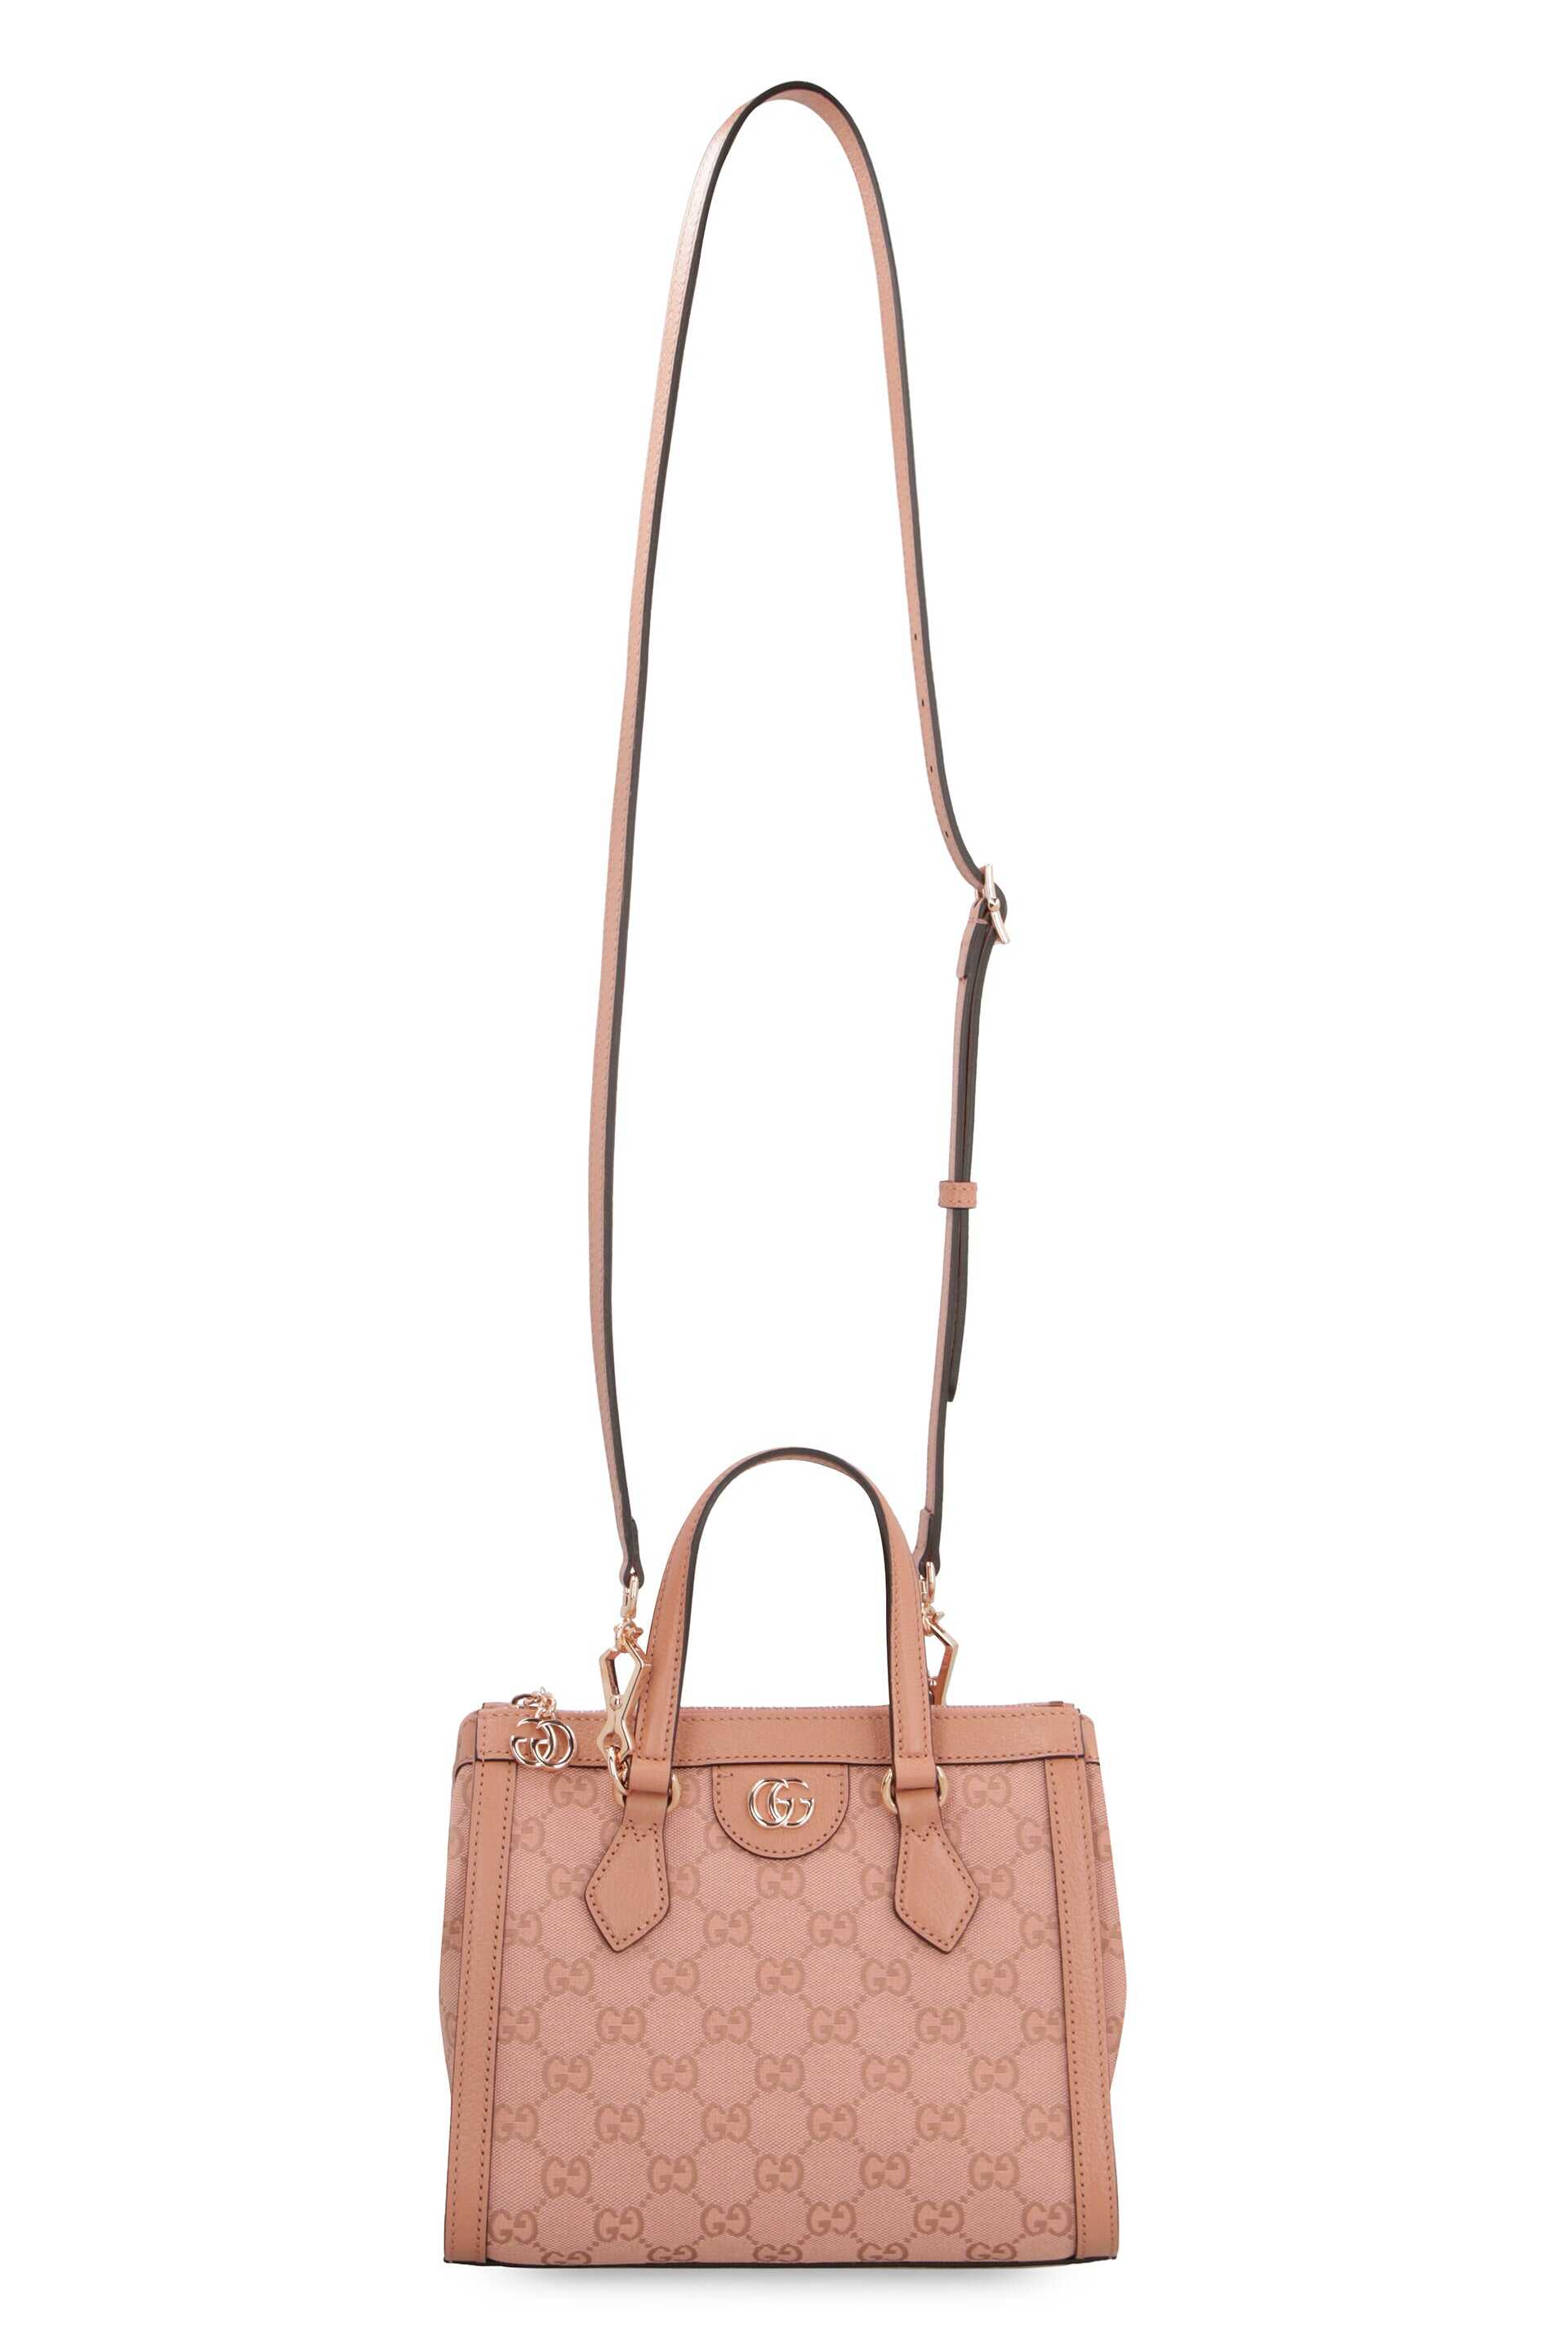 Gucci GUCCI OPHIDIA GG TOTE BAG PINK